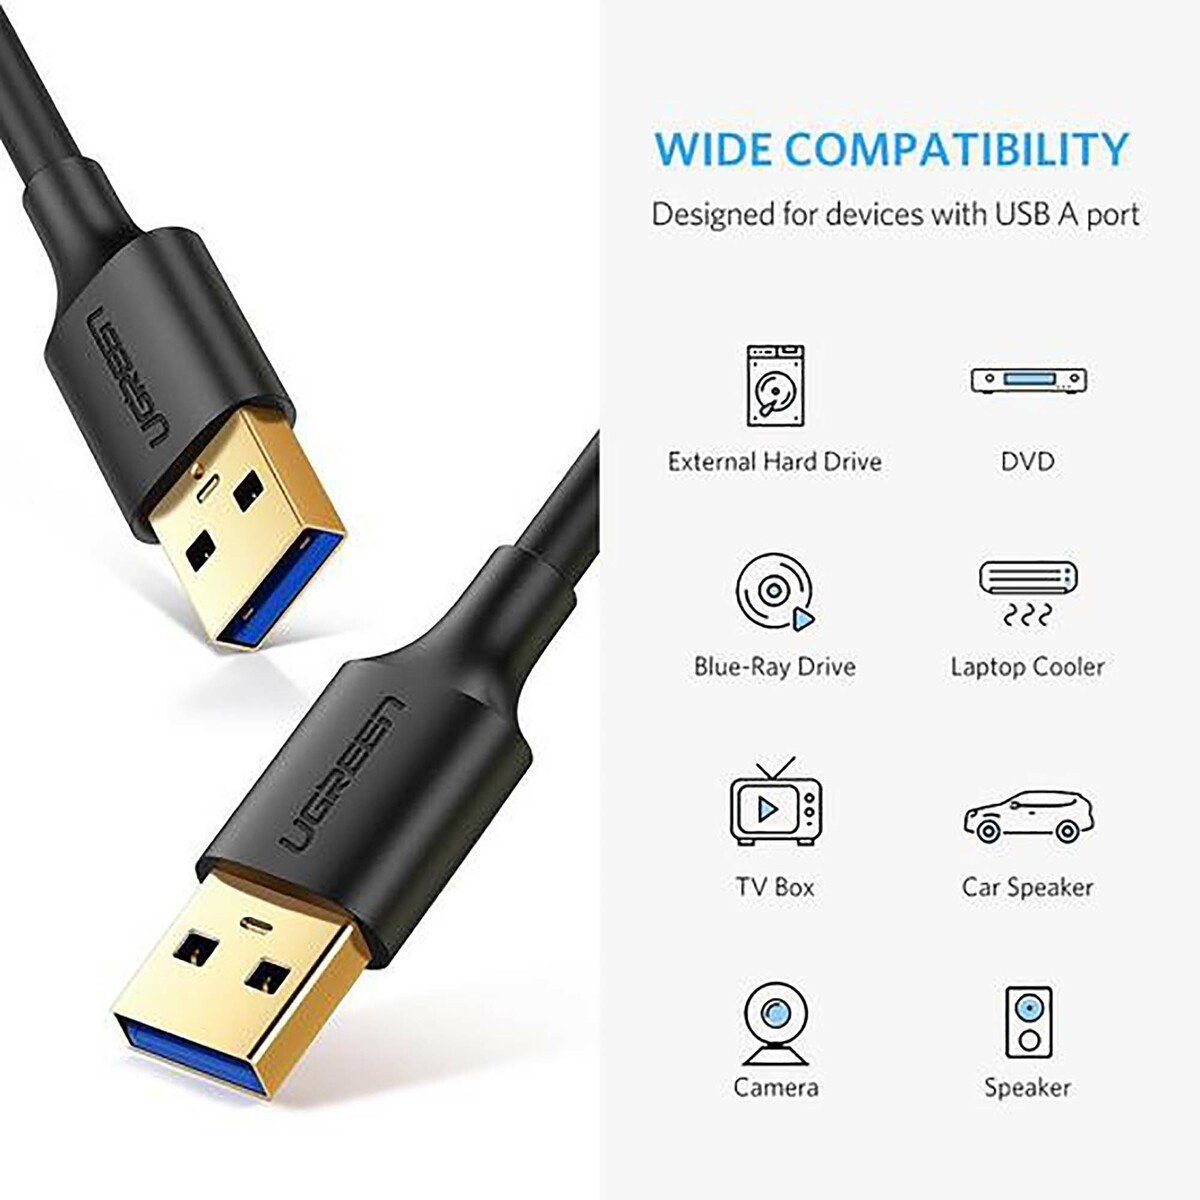 Ugreen USB 3.0 TypeA Male-Male Cable 10370